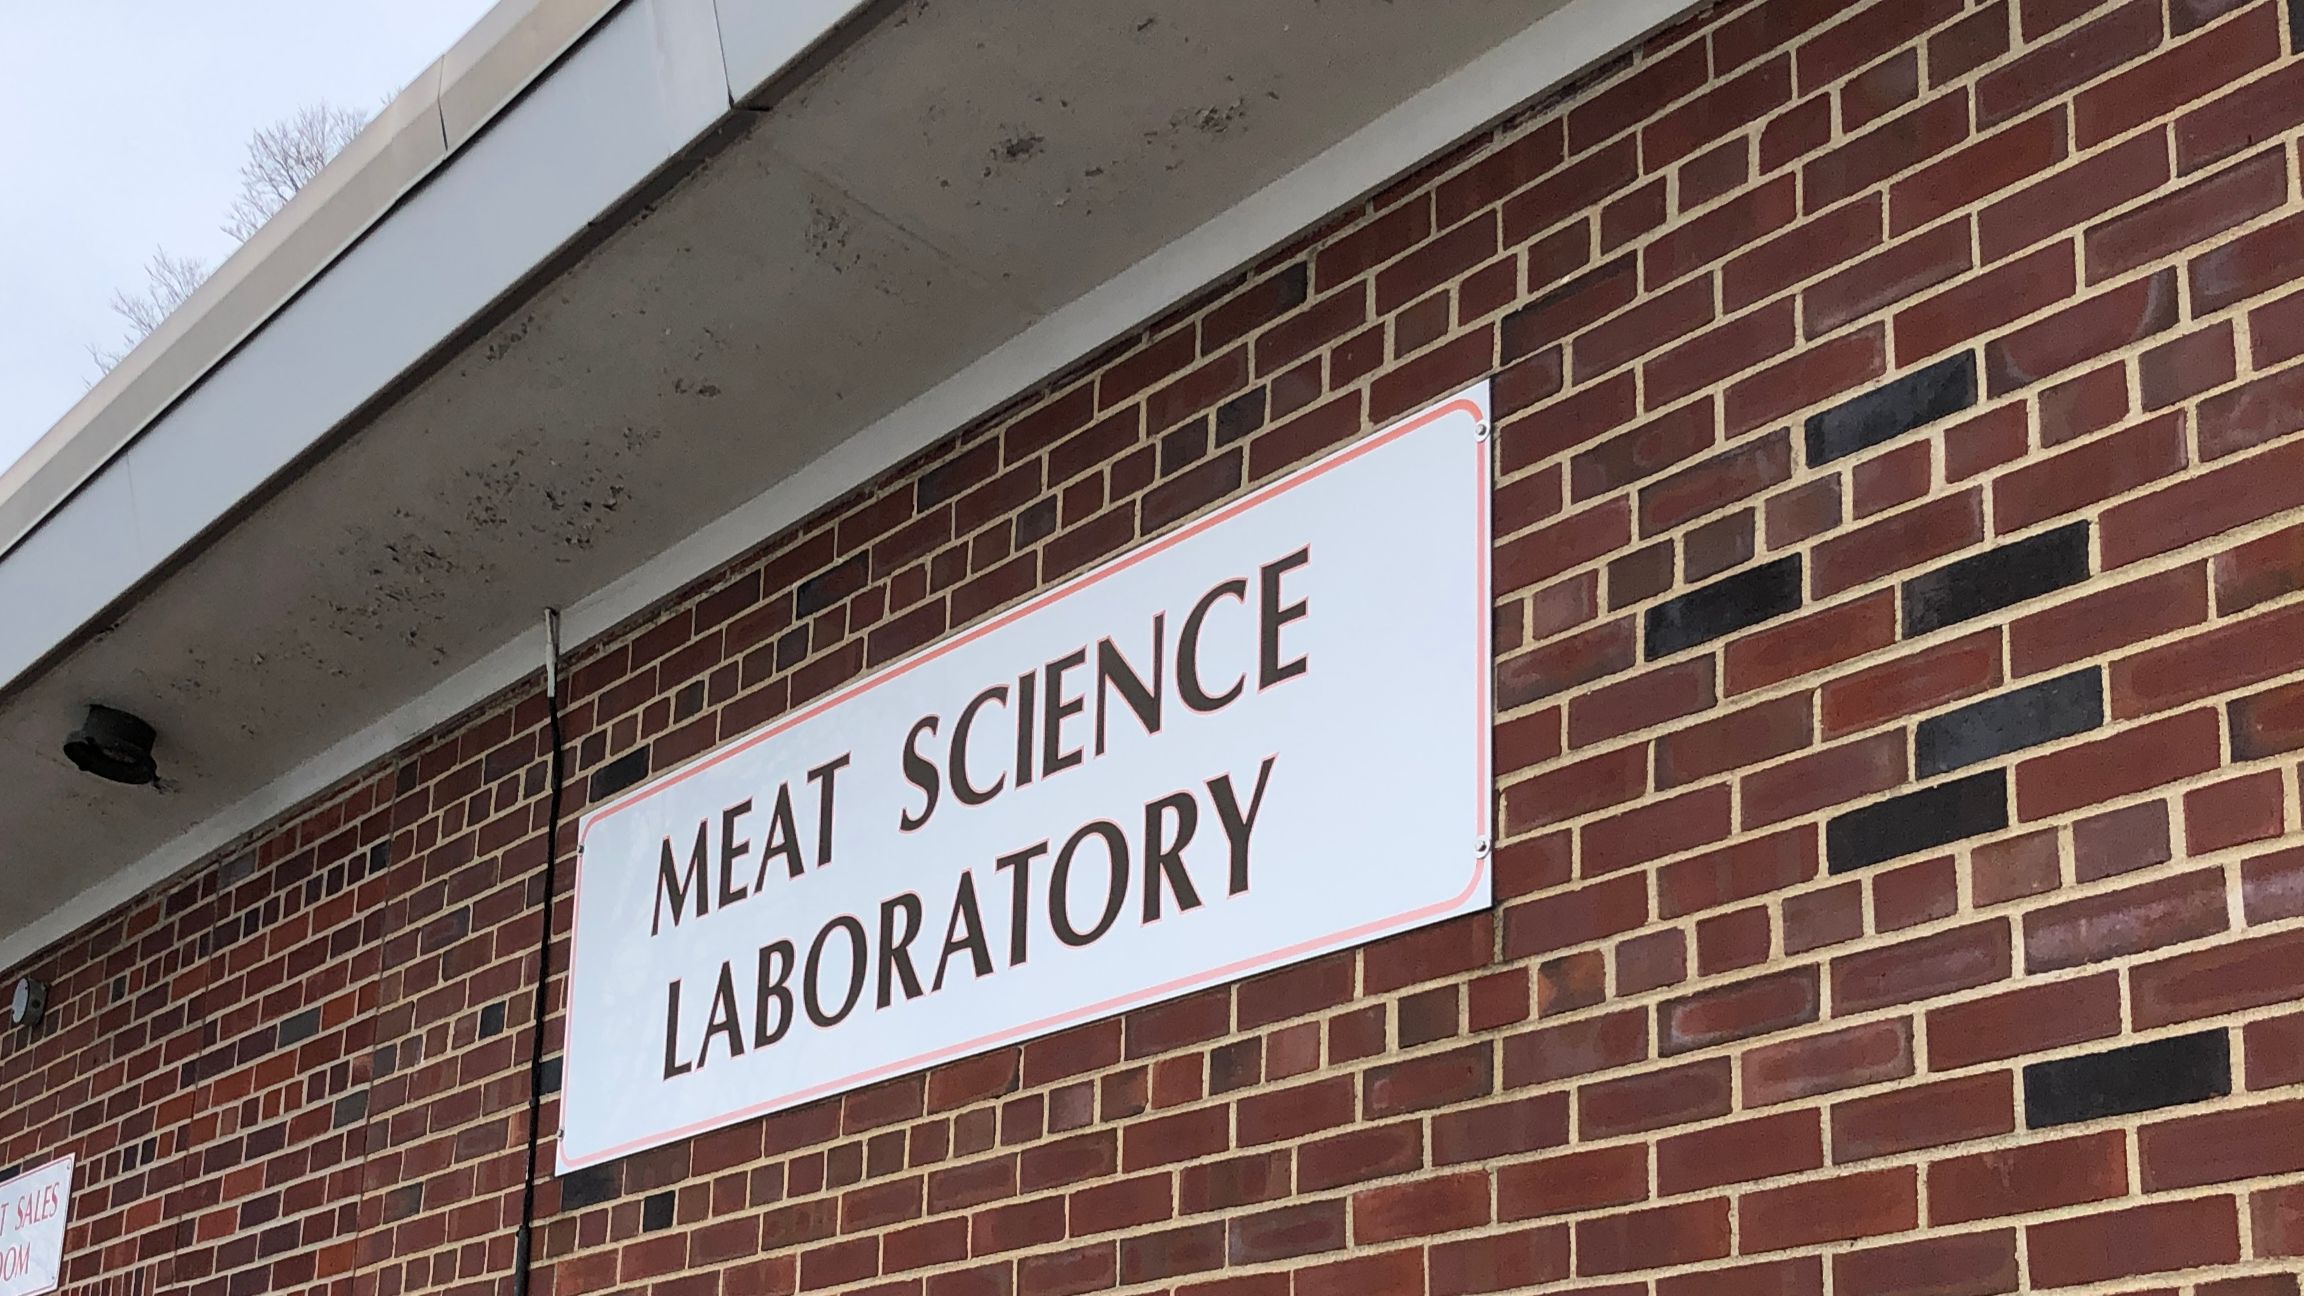 Dogs can get free milk bones with curbside pickup at the Meat Science Lab